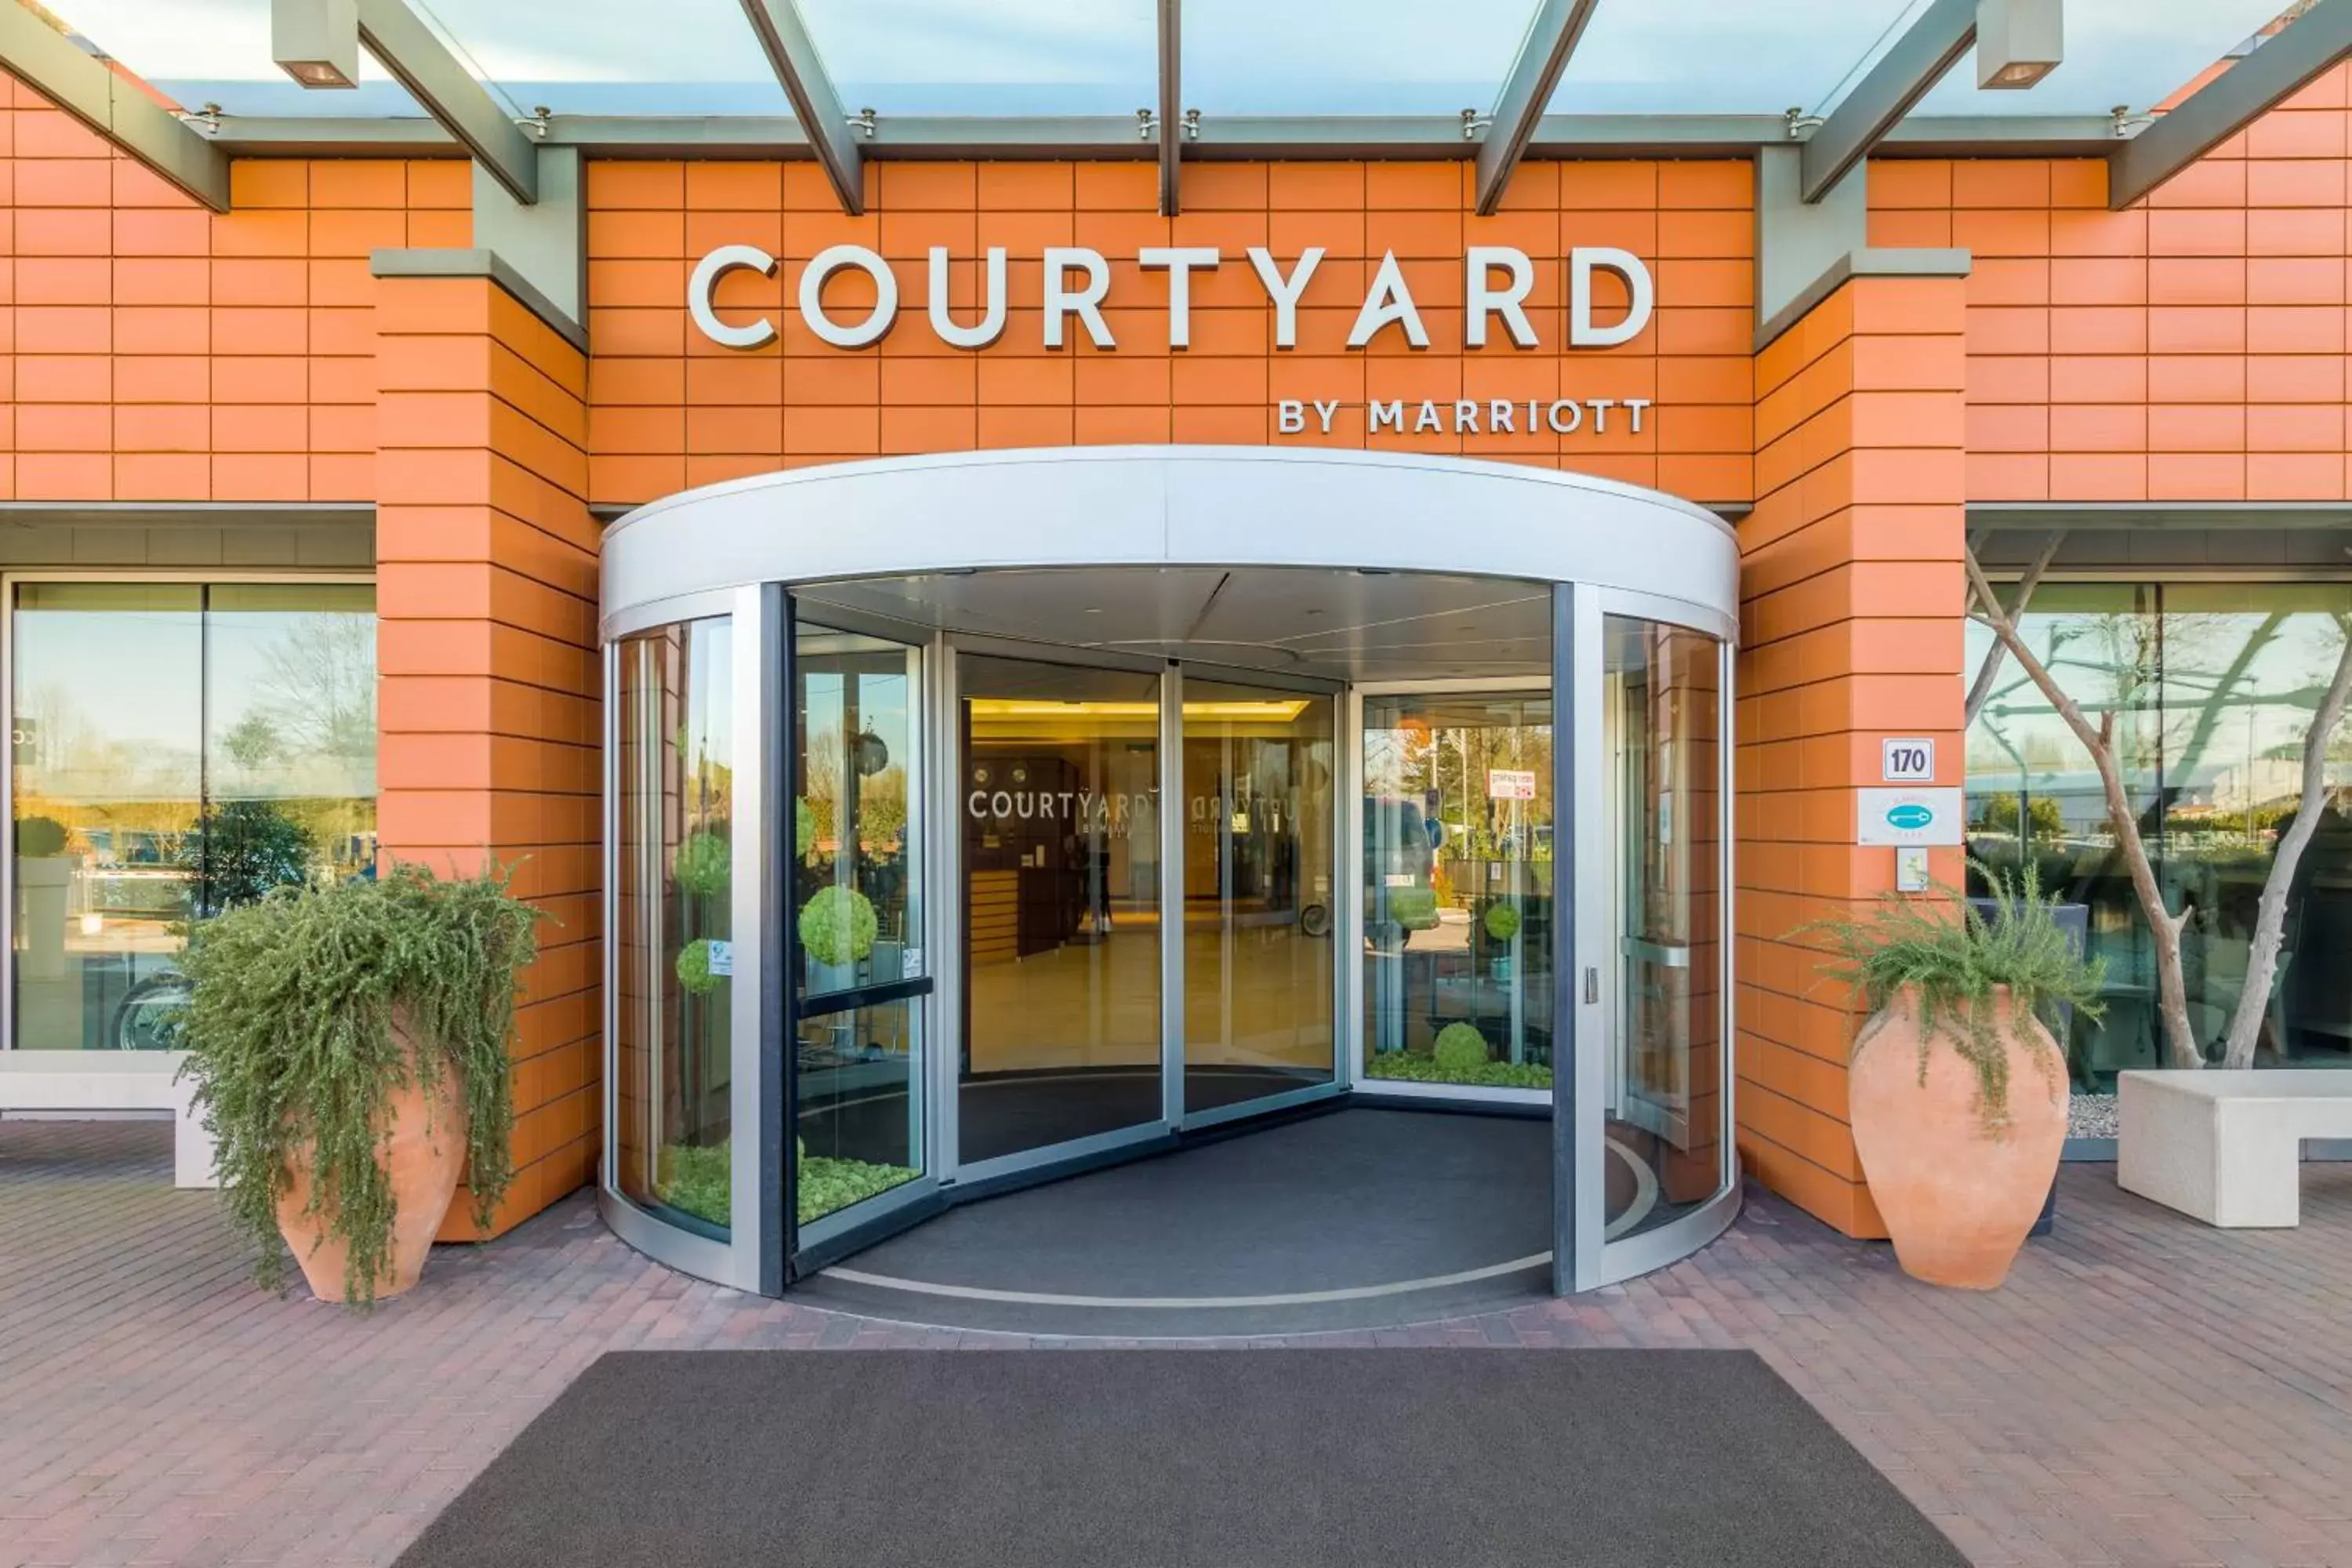 Property building in Courtyard by Marriott Venice Airport